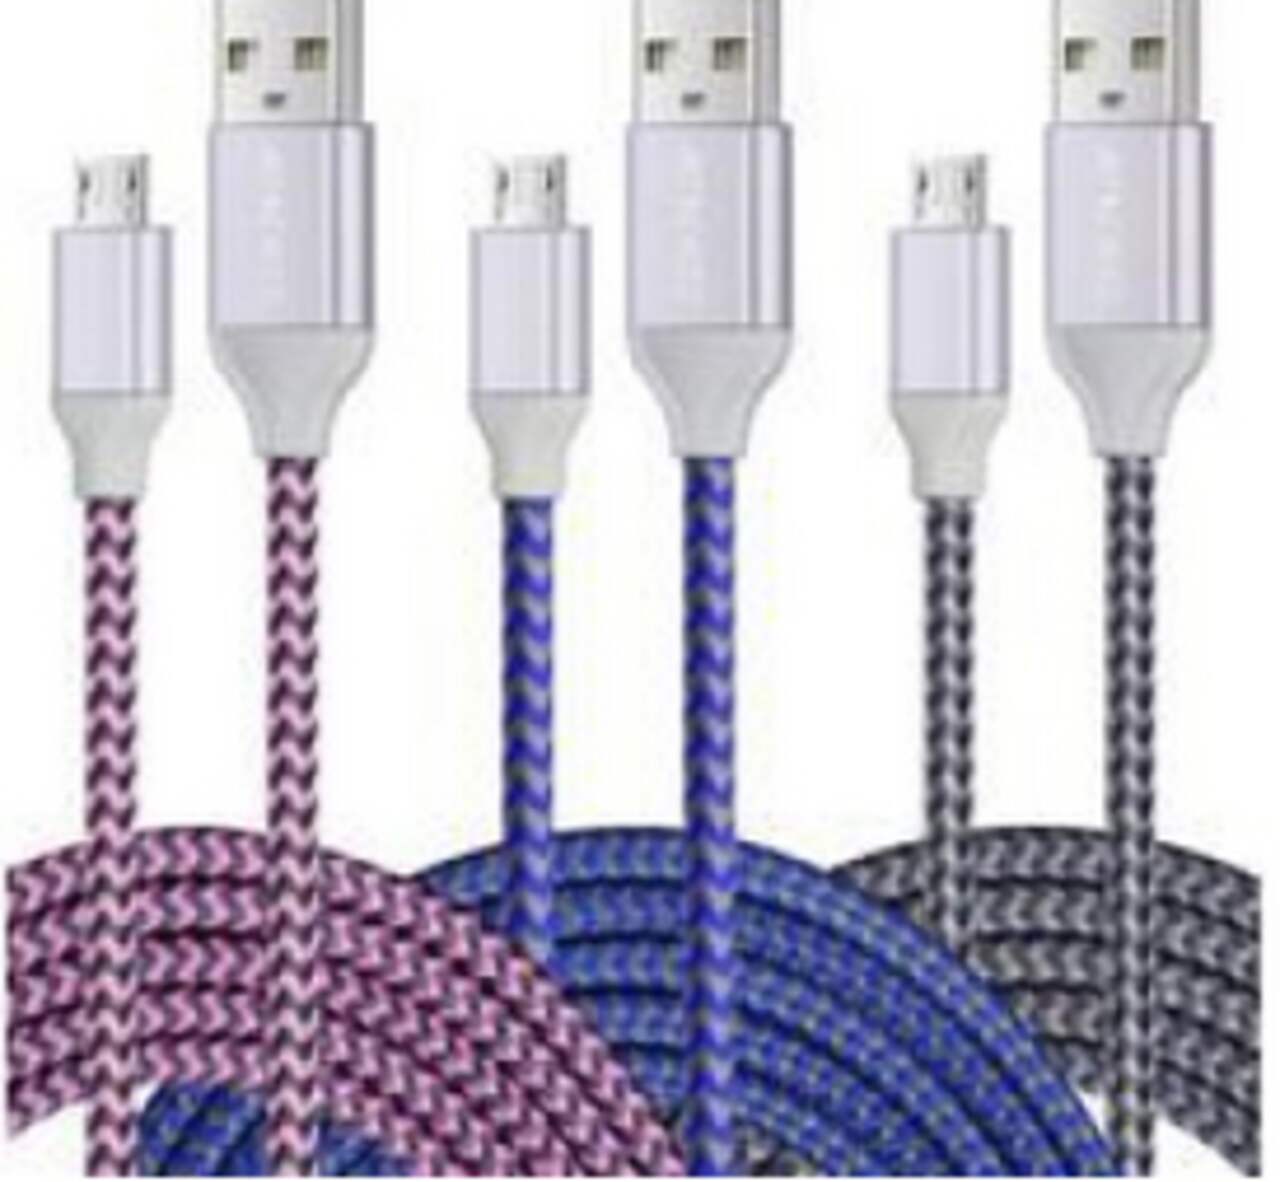 BK Type-C USB Charger & Sync Cable, 10-ft